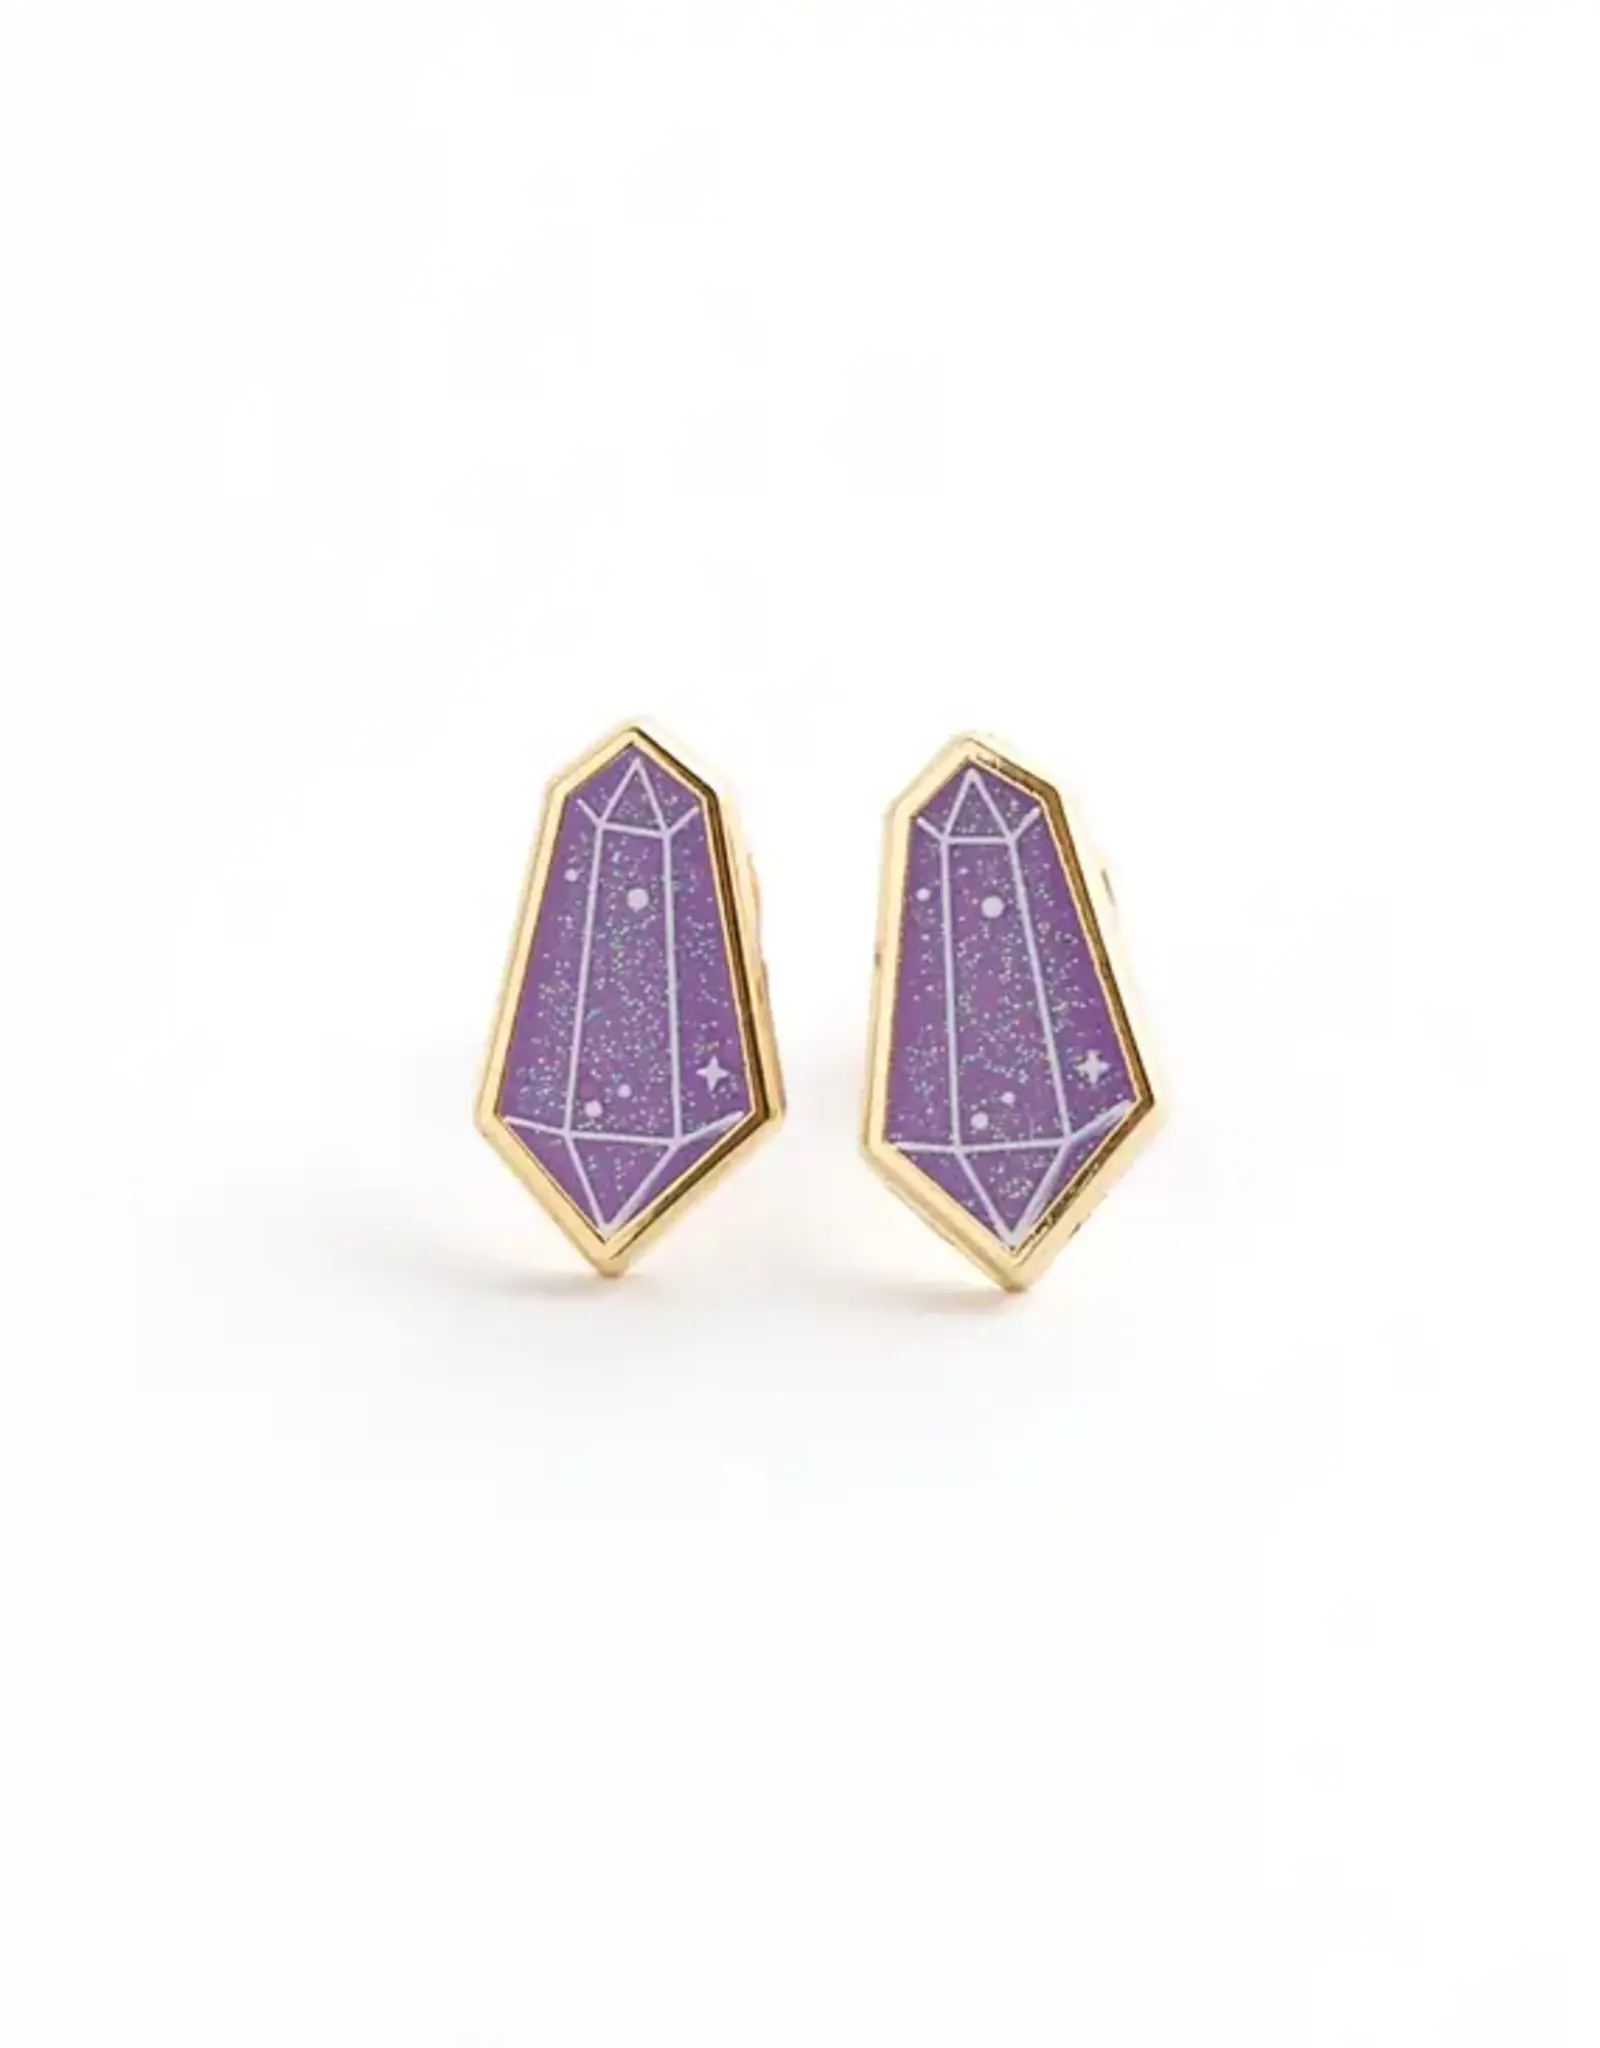 Lux Cups Creative Earrings - Stud: Lux Mystical Crystals